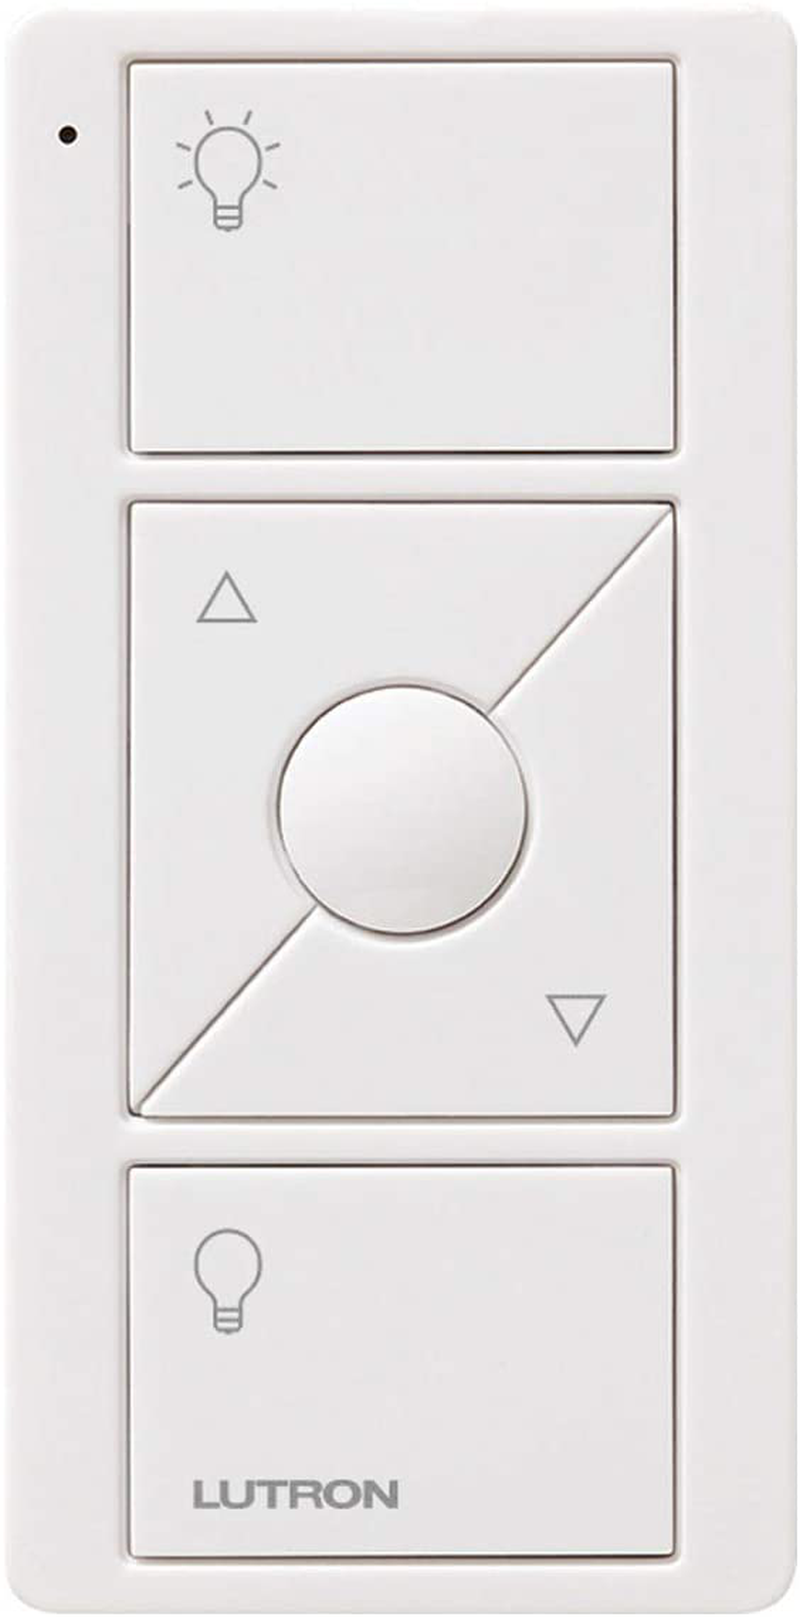 Lutron 3-Button with Raise/Lower Pico Remote for Caseta Wireless Smart Lighting Dimmer Switch, PJ2-3BRL-WH-L01R, White Animals & Pet Supplies > Pet Supplies > Dog Supplies > Dog Houses Lutron White  